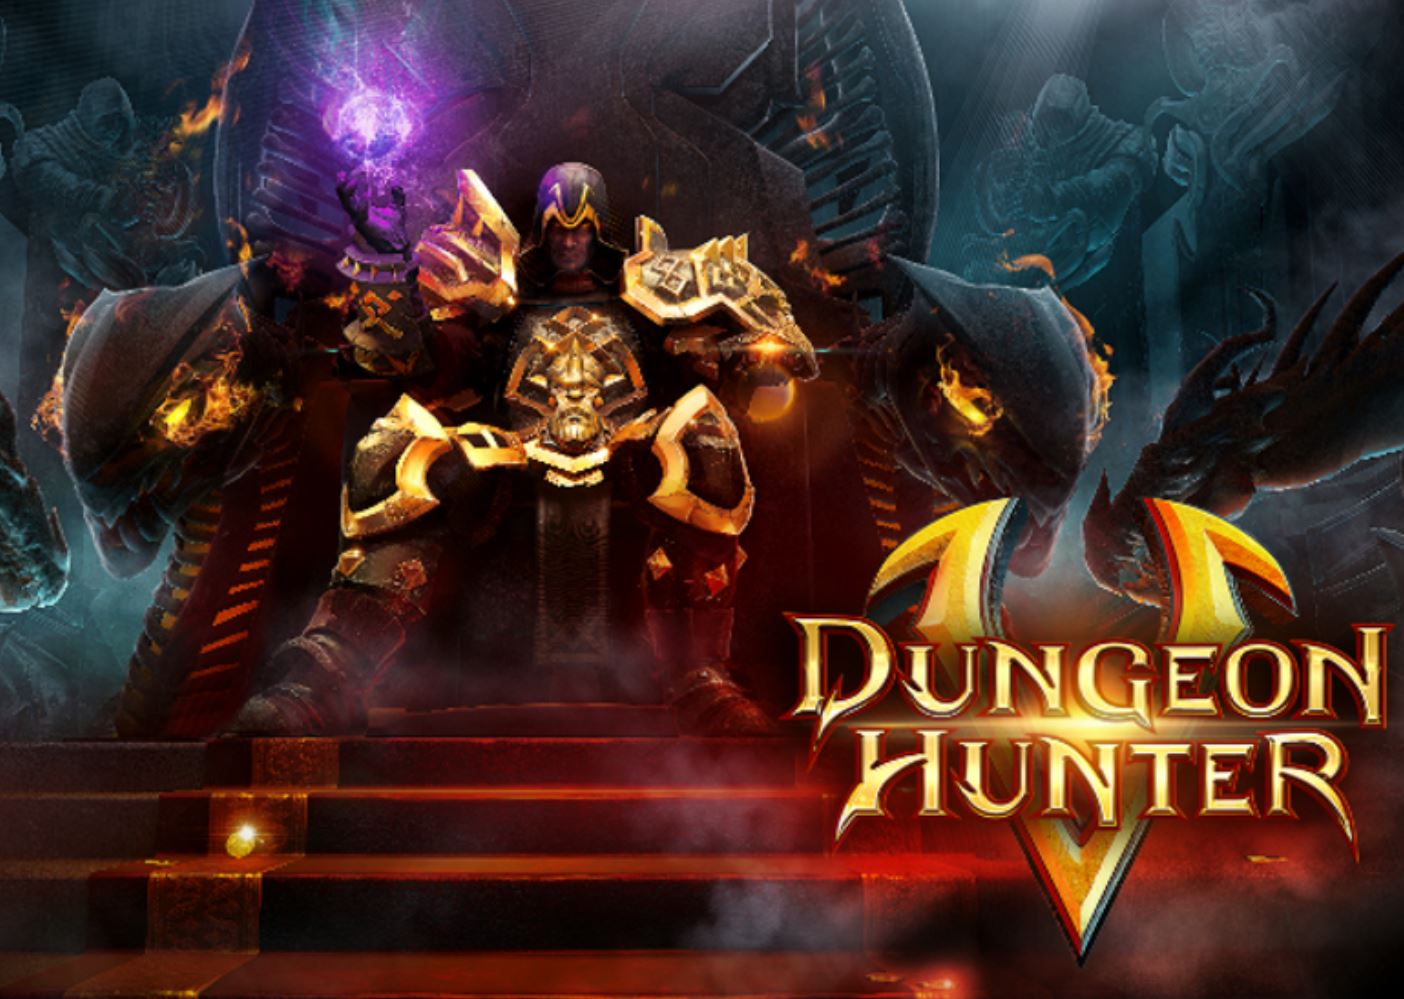 pc dungeon hunter 5 not connecting to servers